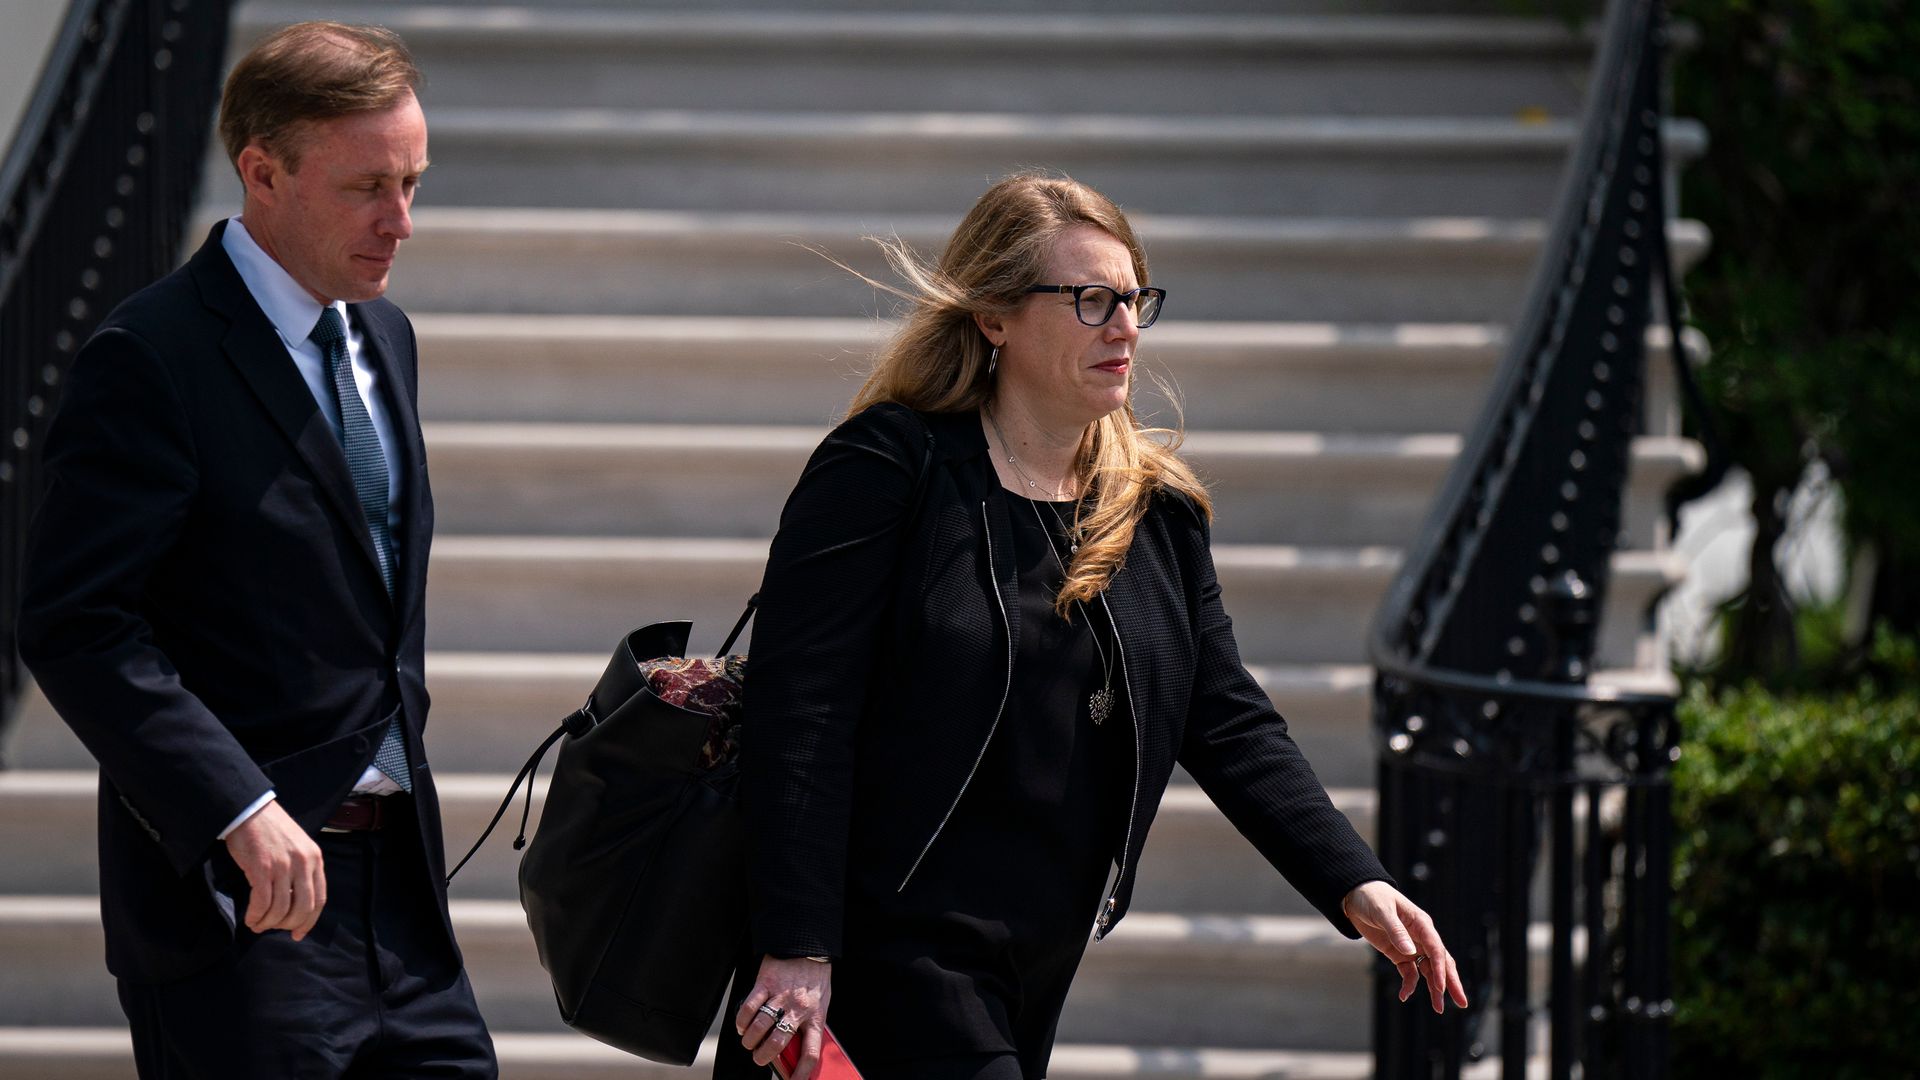 Jen O'Malley Dillon, White House deputy chief of staff, and Jake Sullivan leaving the White House.